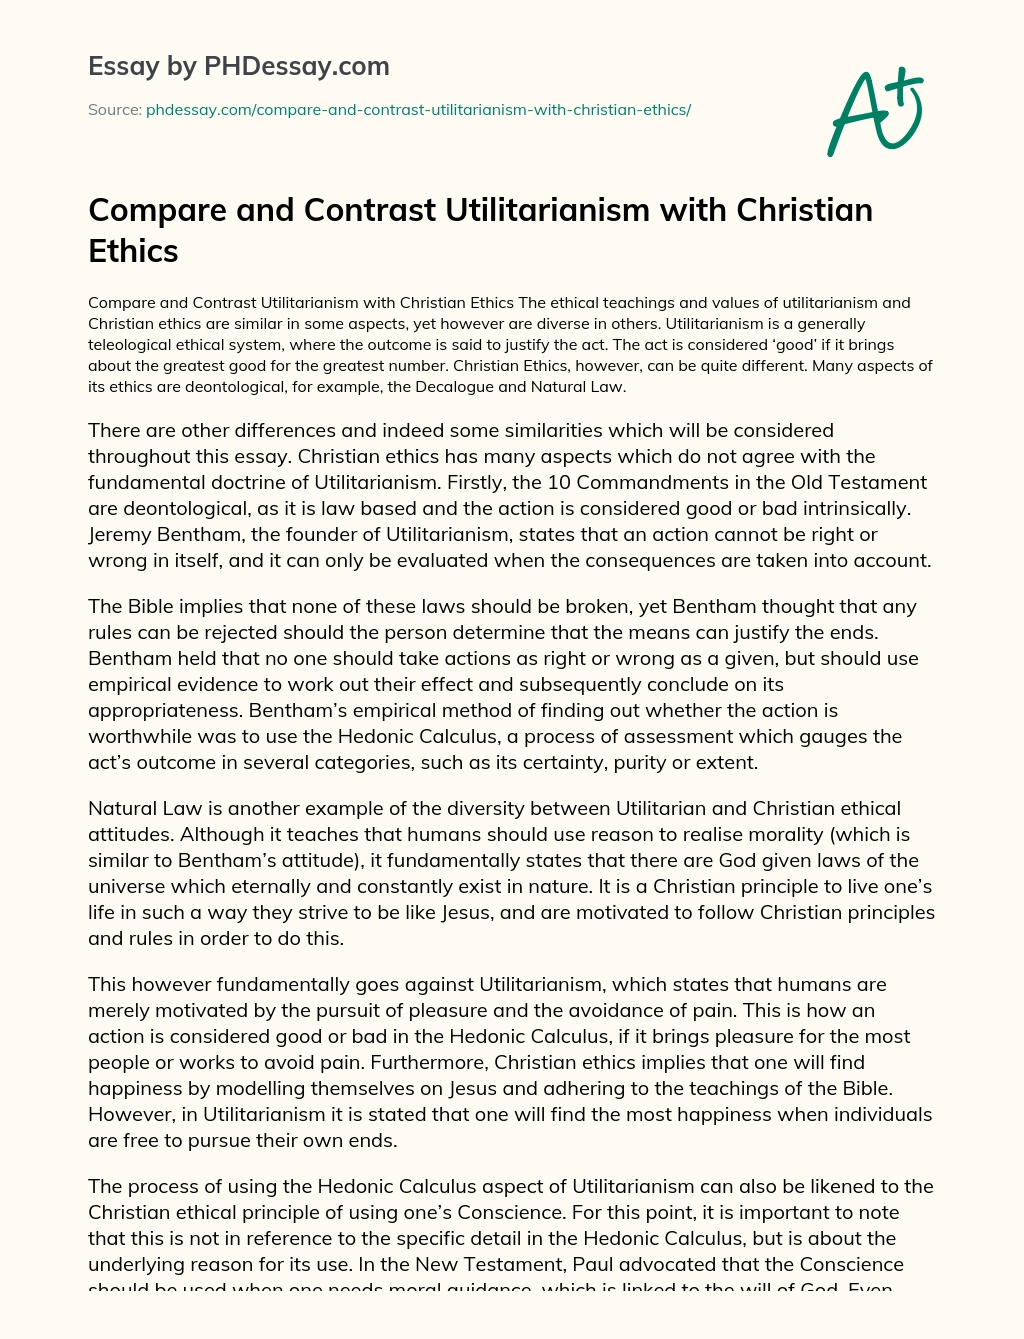 Compare and Contrast Utilitarianism with Christian Ethics essay